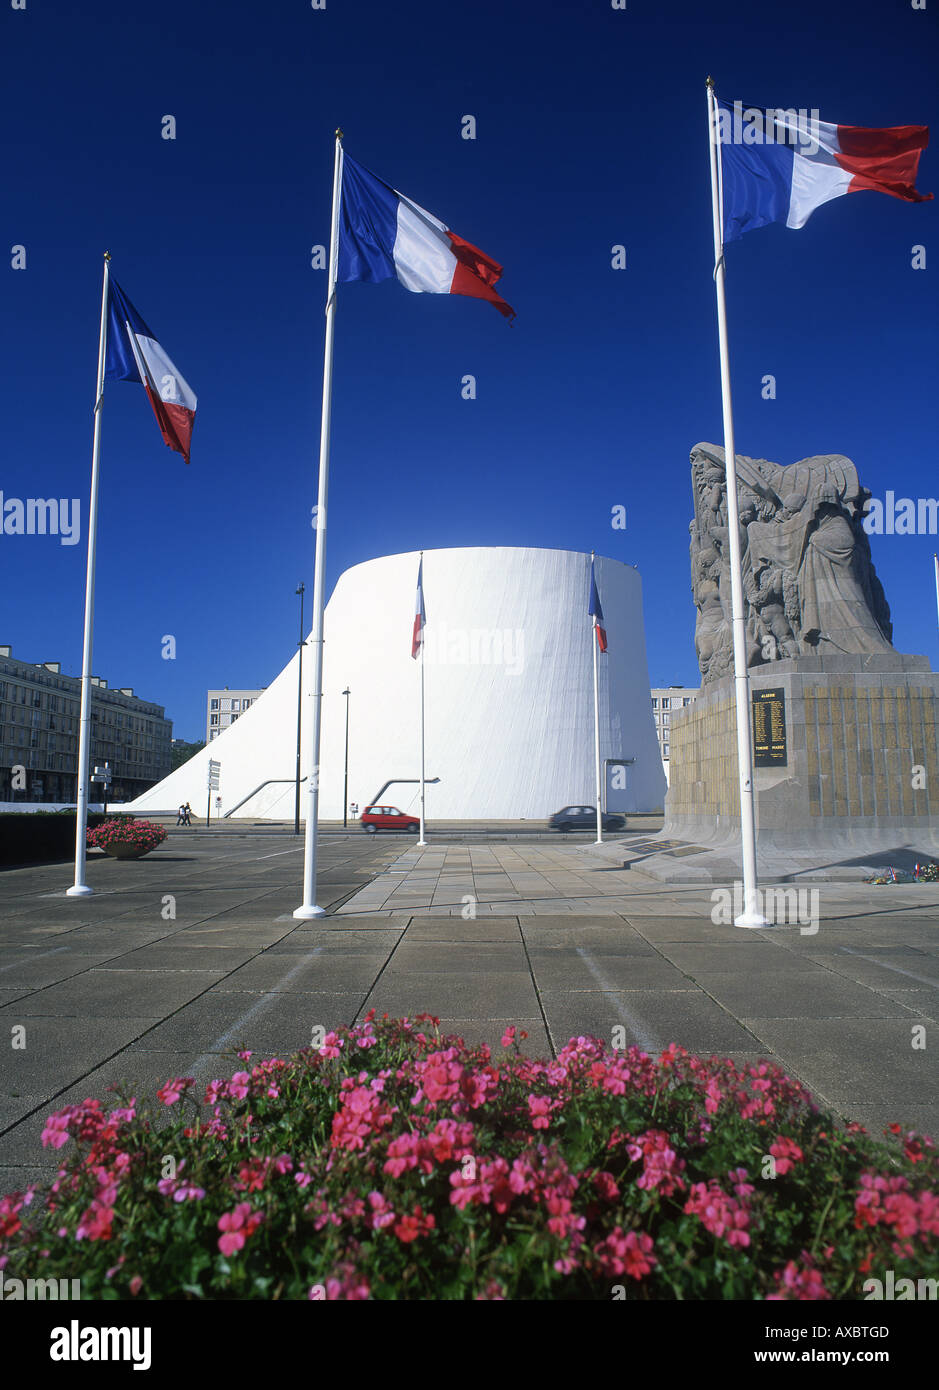 Volcano Building,war memorial and French flags Espace Oscar Niemeyer Le Havre Seine-Maritime Normandy France Stock Photo